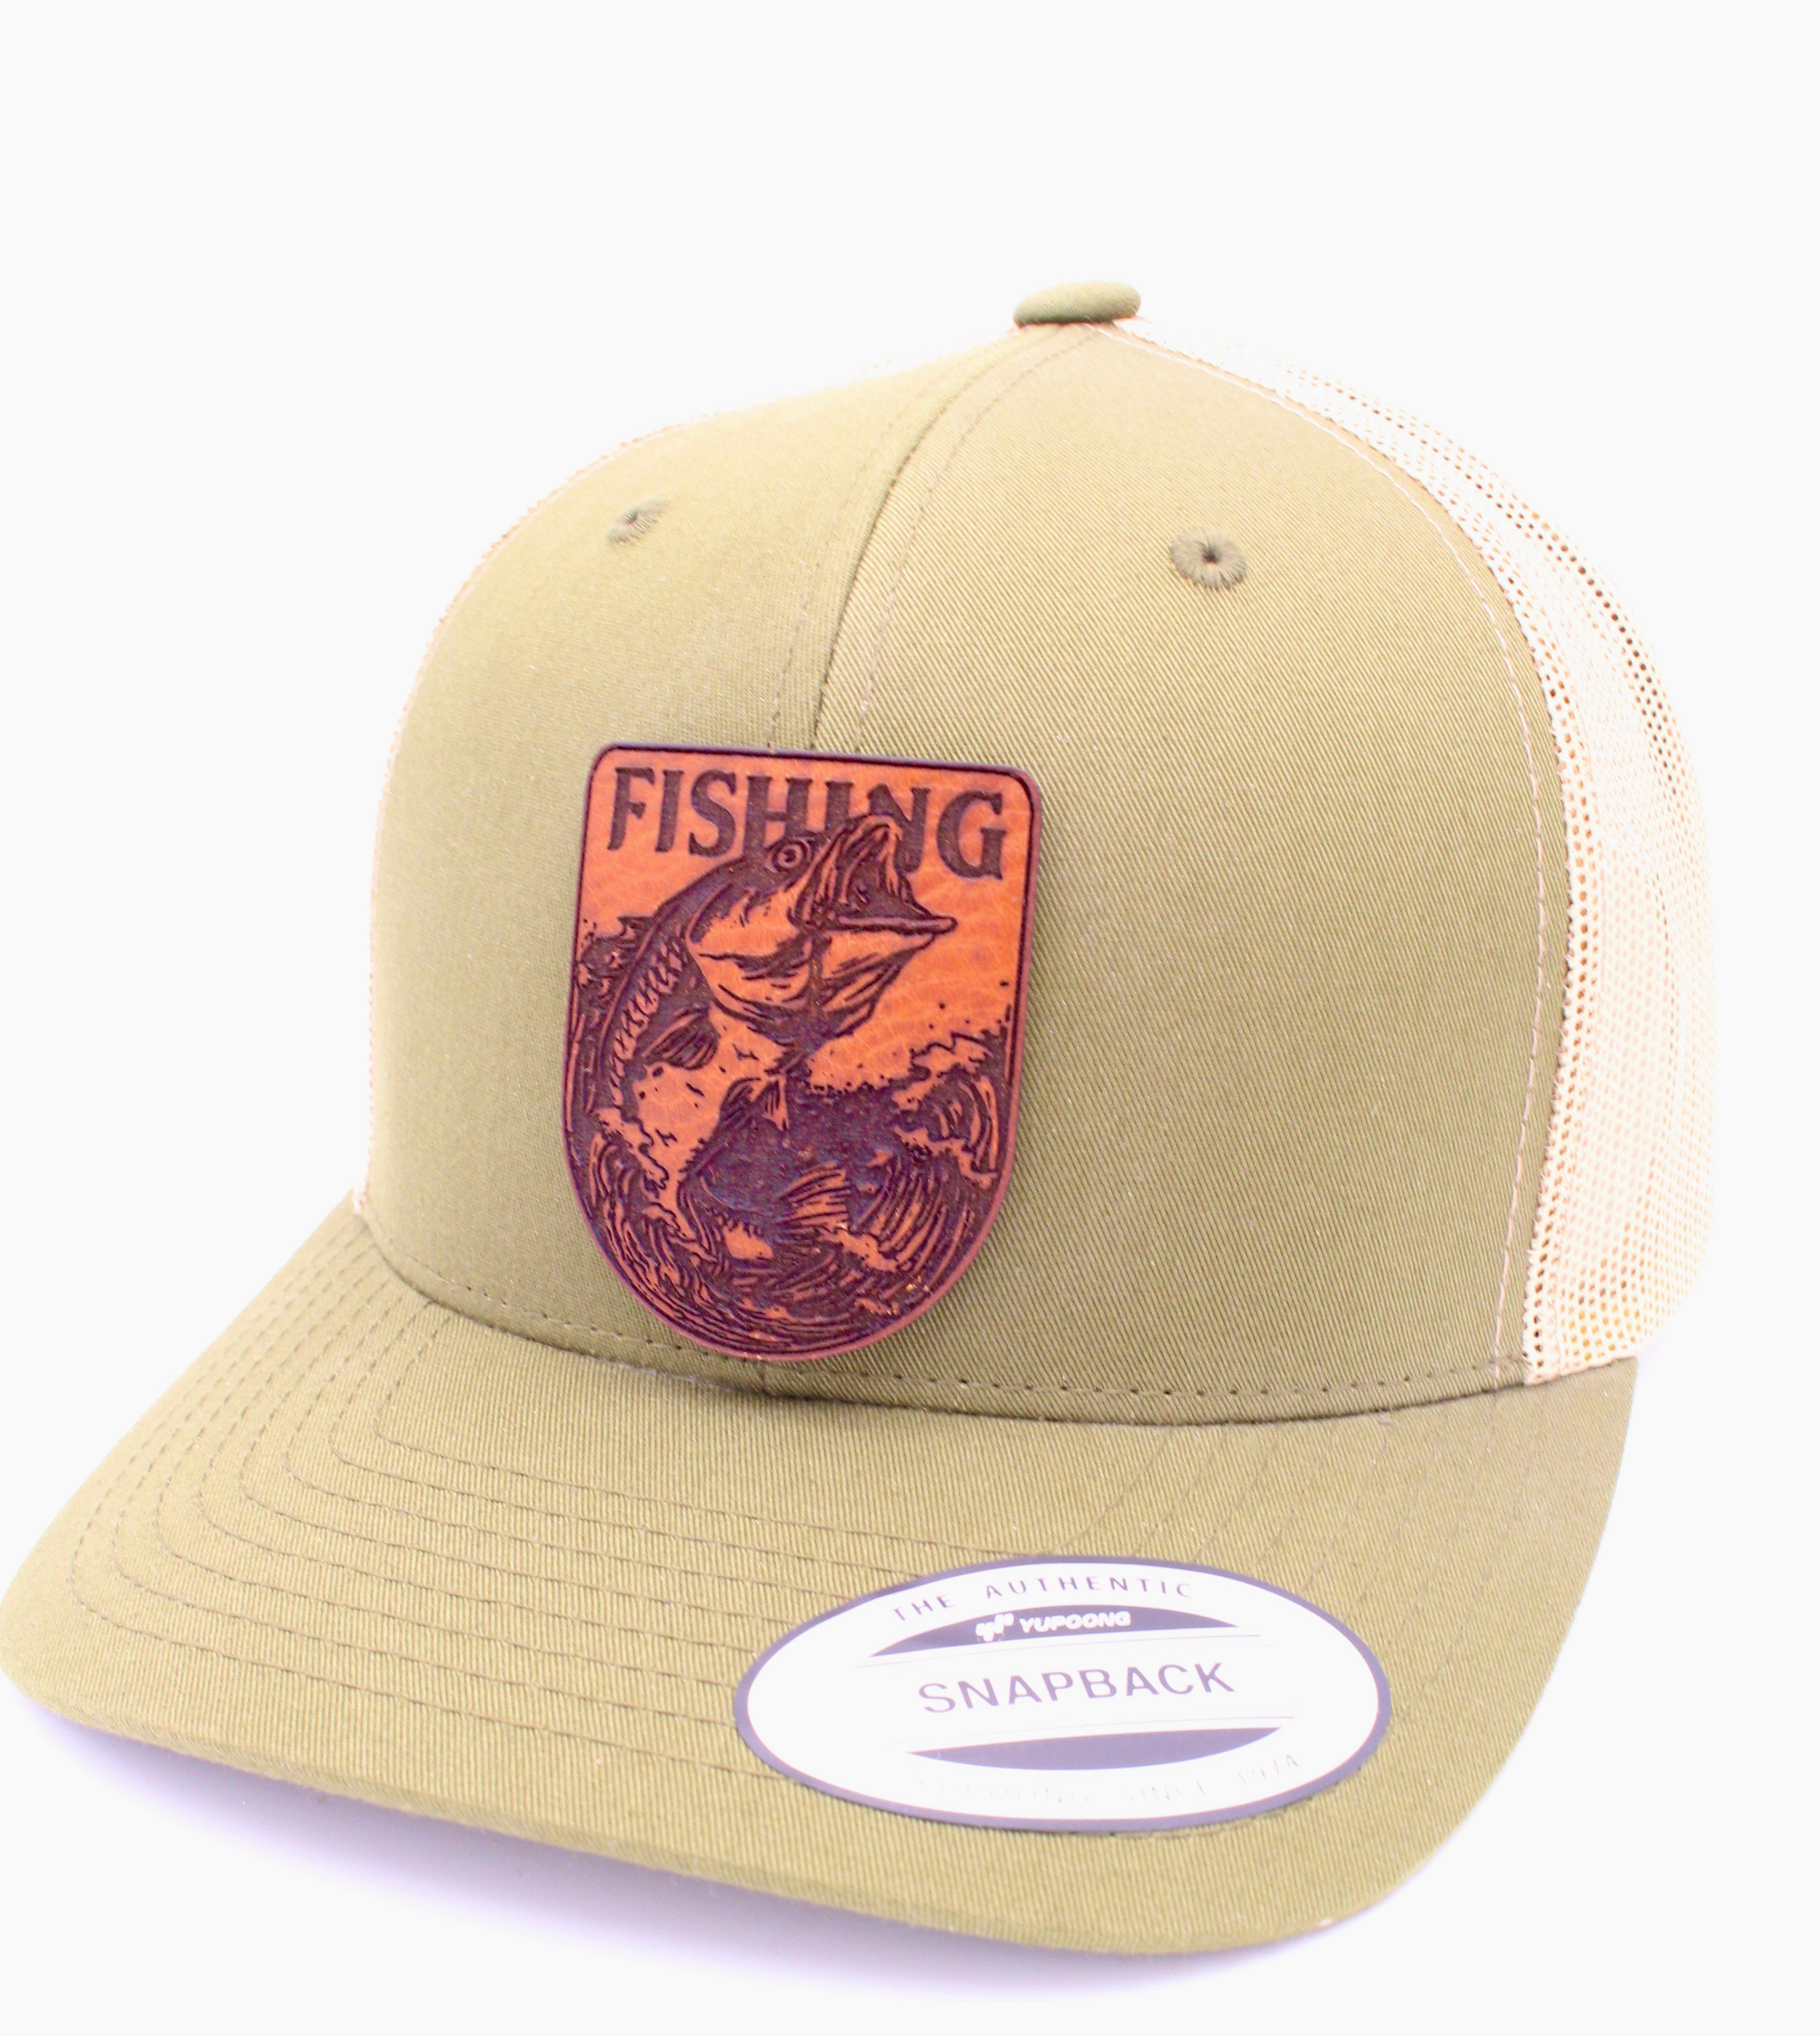 Southern Fin Est. 2014 Fishing Clothing Apparel Camo Snap Back Patch Hat  Cap